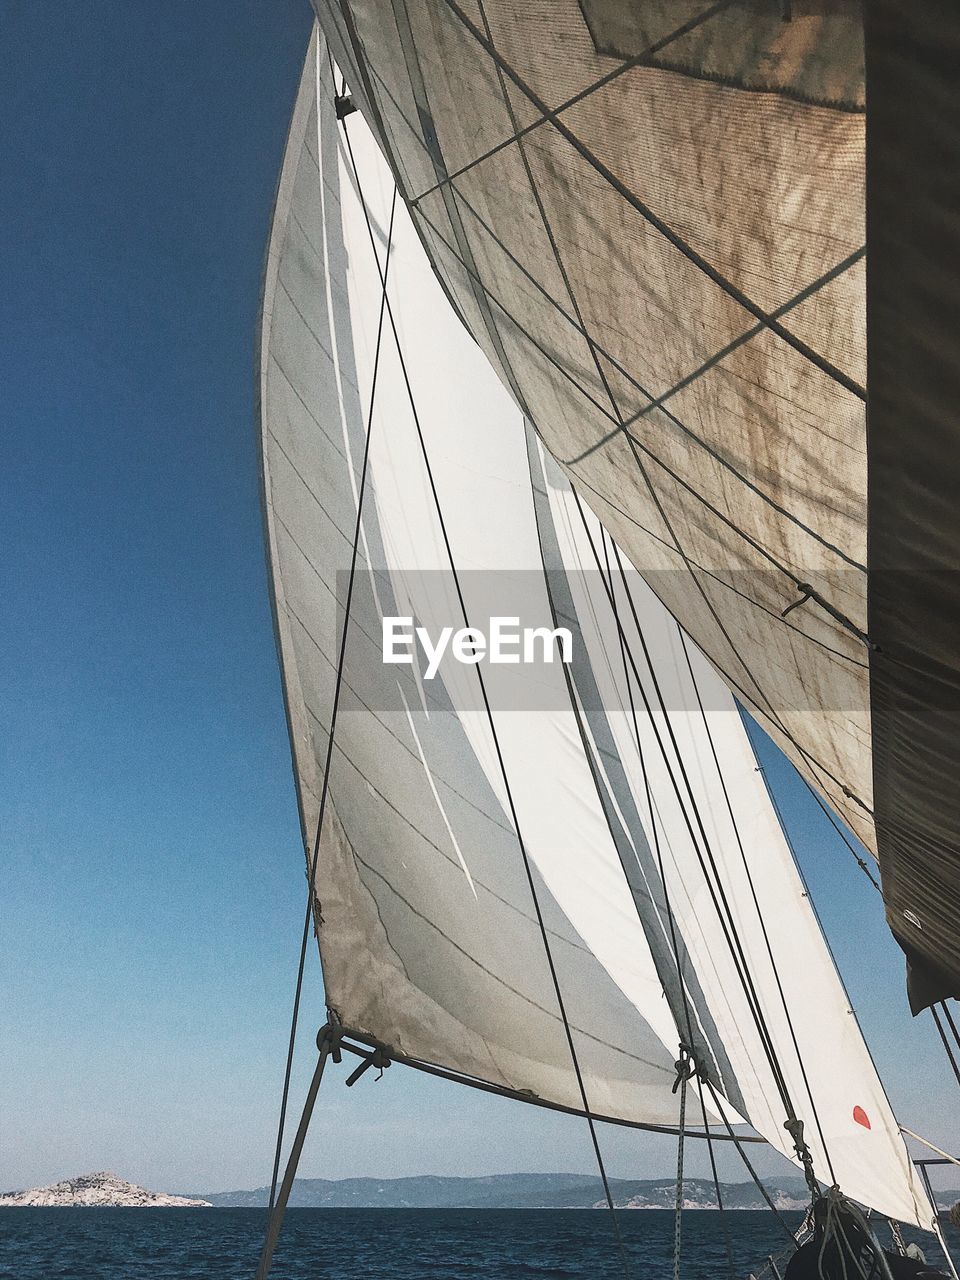 LOW ANGLE VIEW OF BOAT SAILING IN SEA AGAINST CLEAR SKY